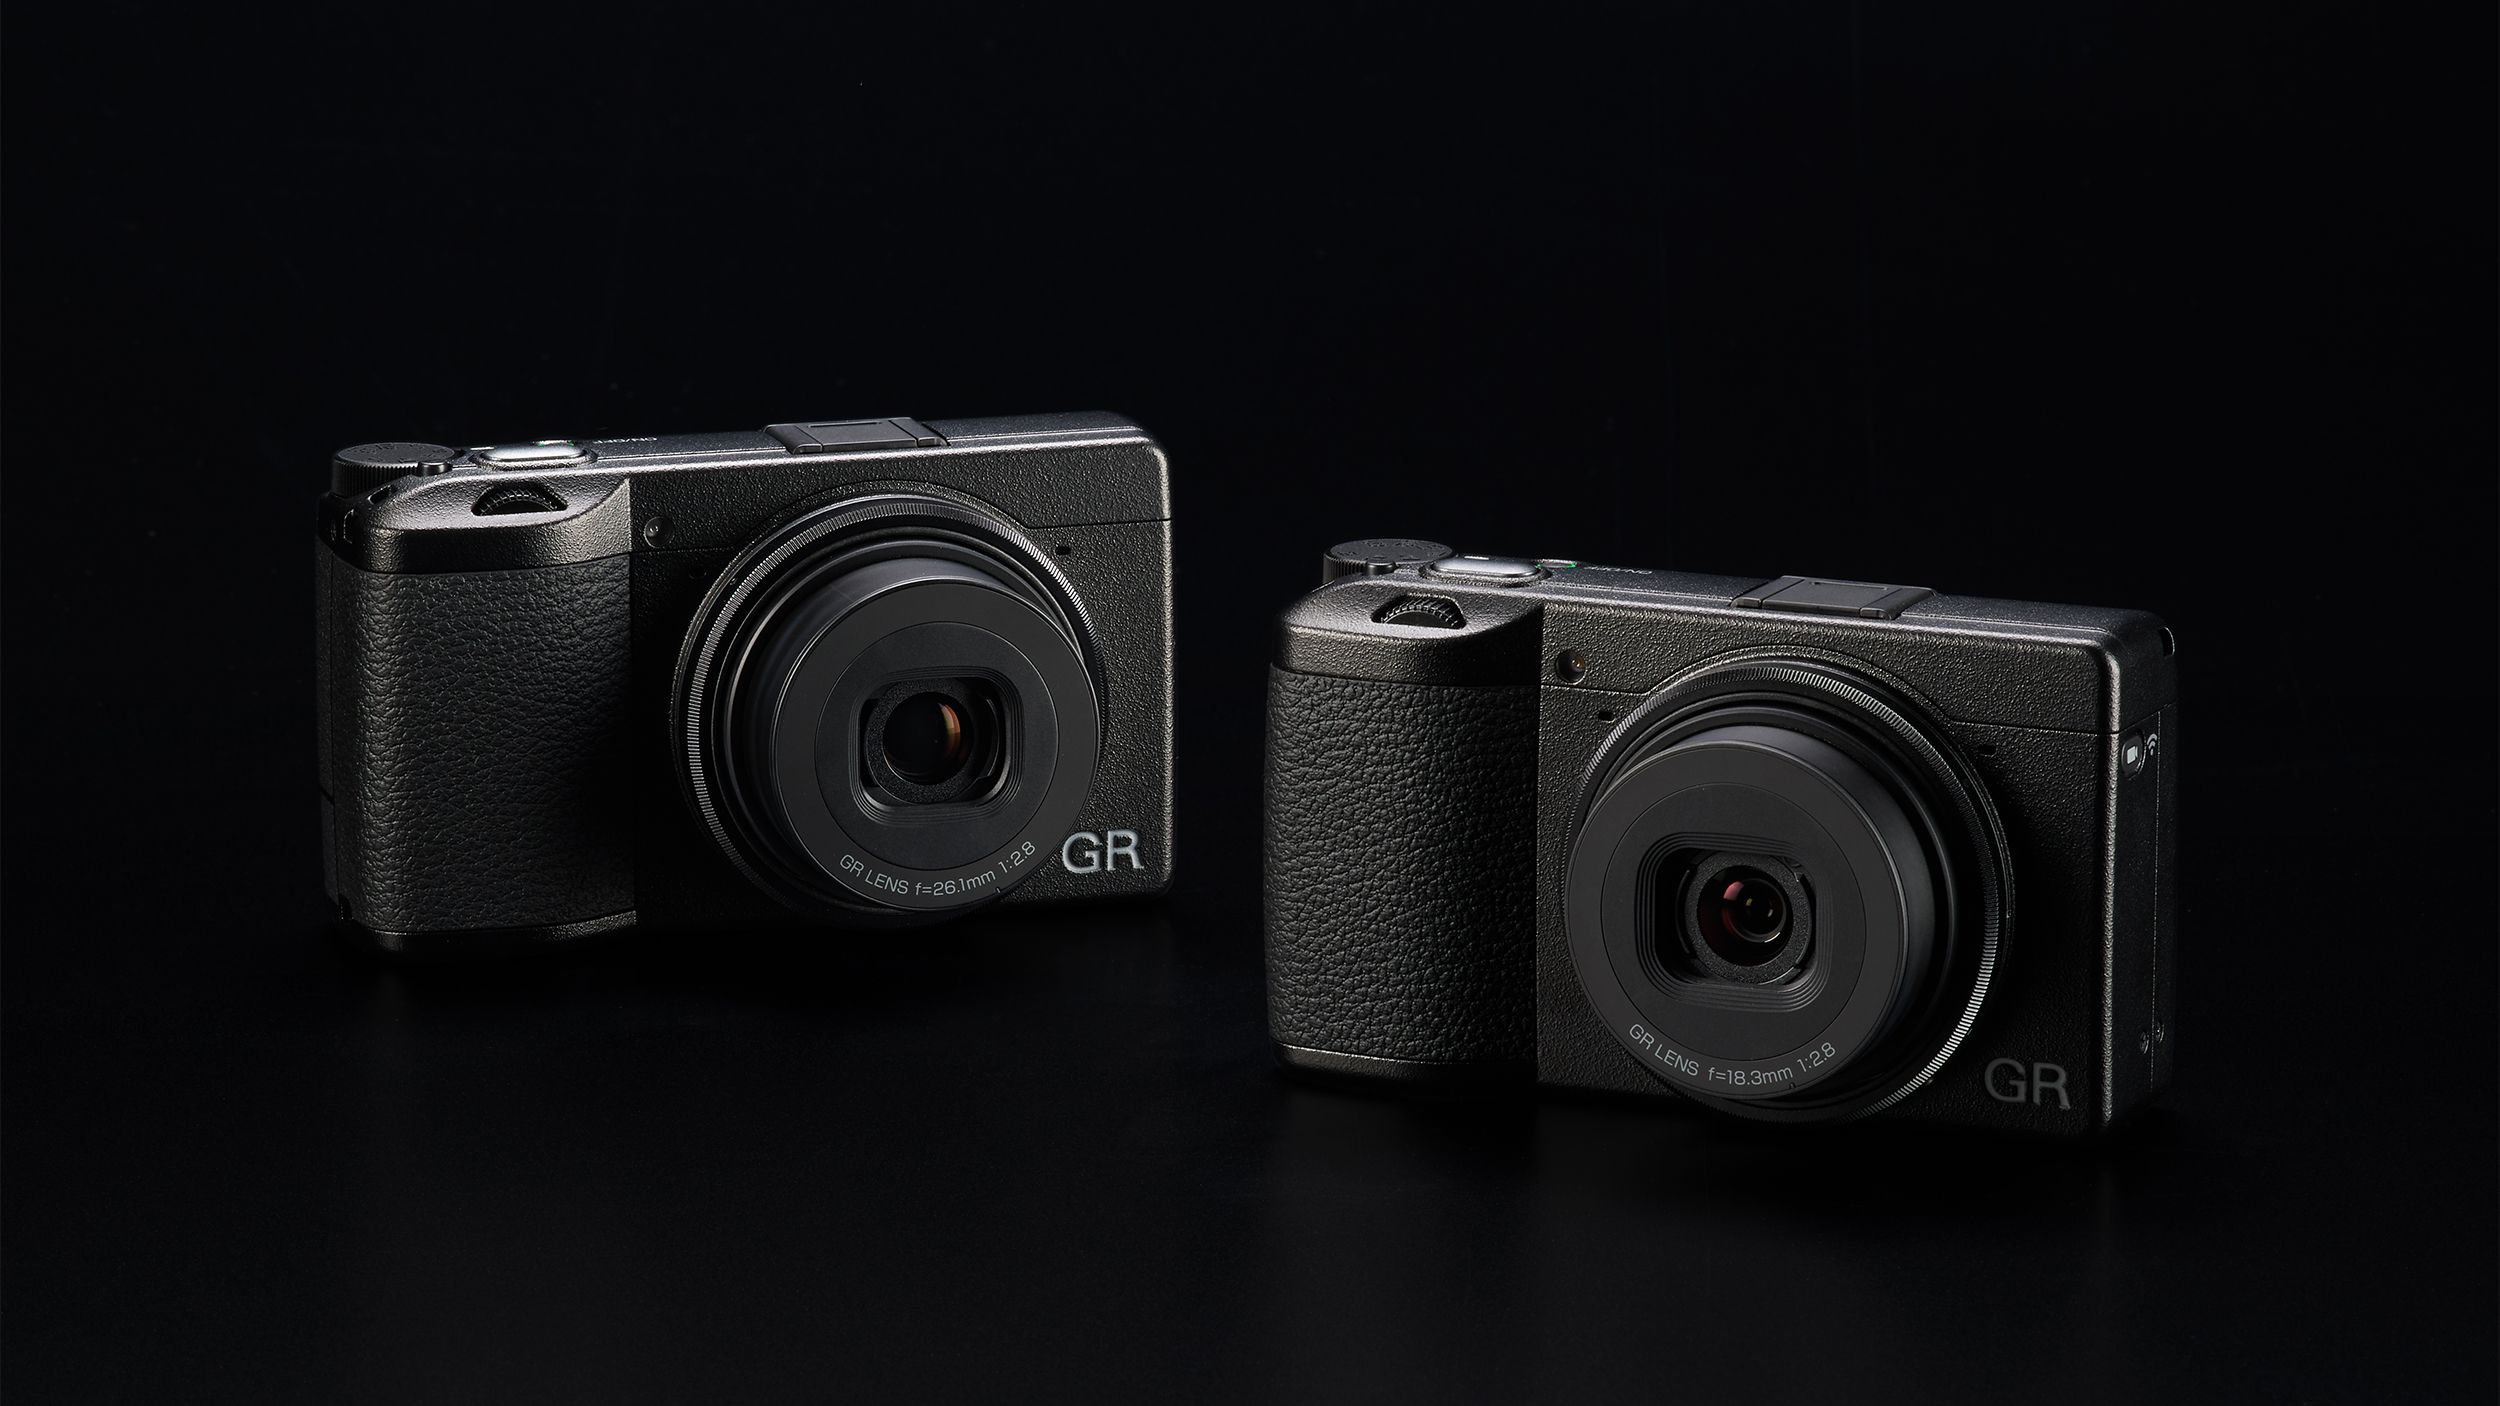 The Ricoh GR series HDF cameras offer dreamy vibes